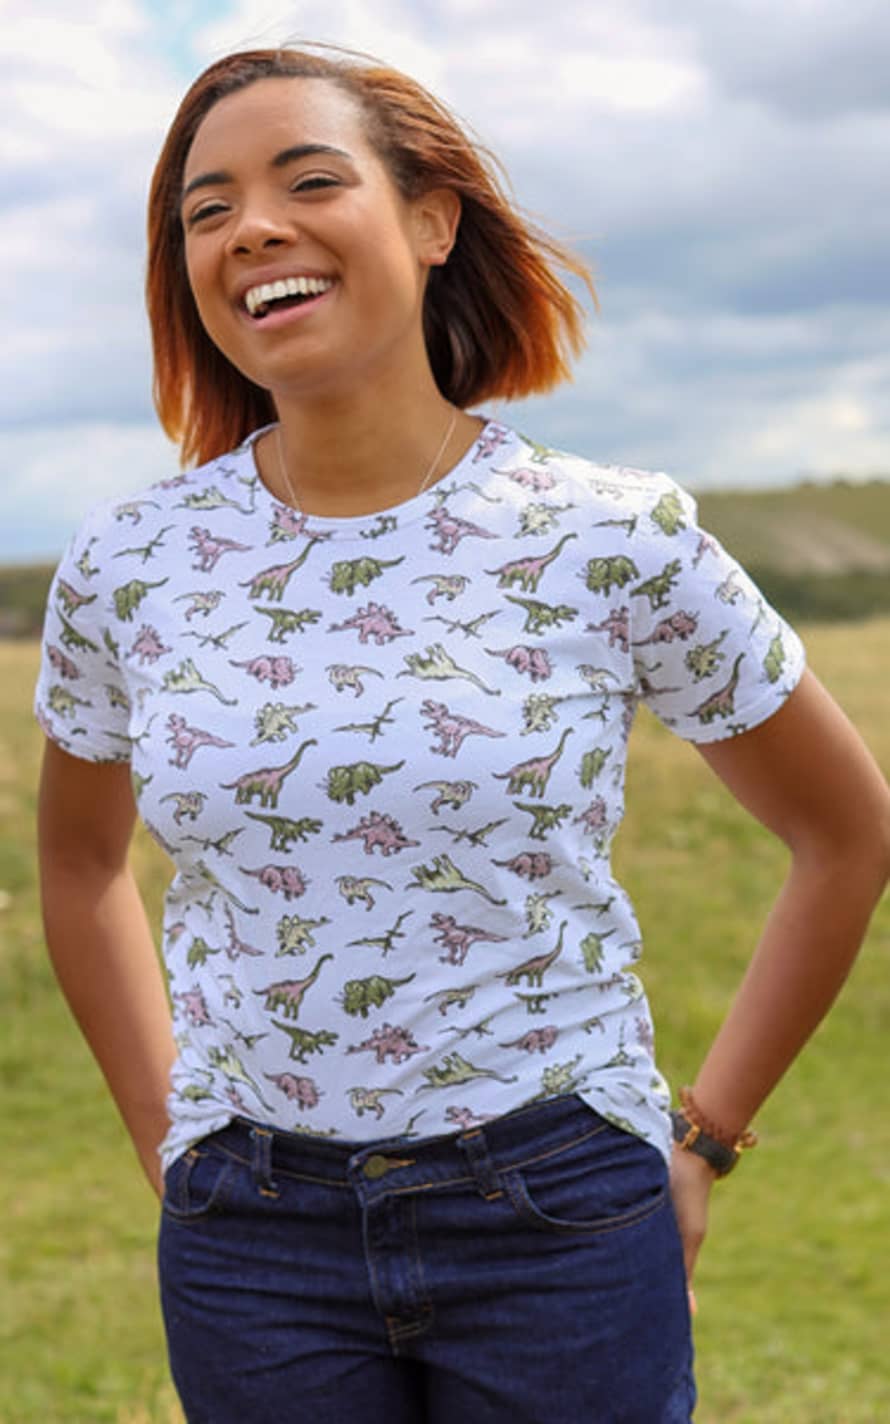 Run and Fly Unisex T-shirt Dinosaurs On White